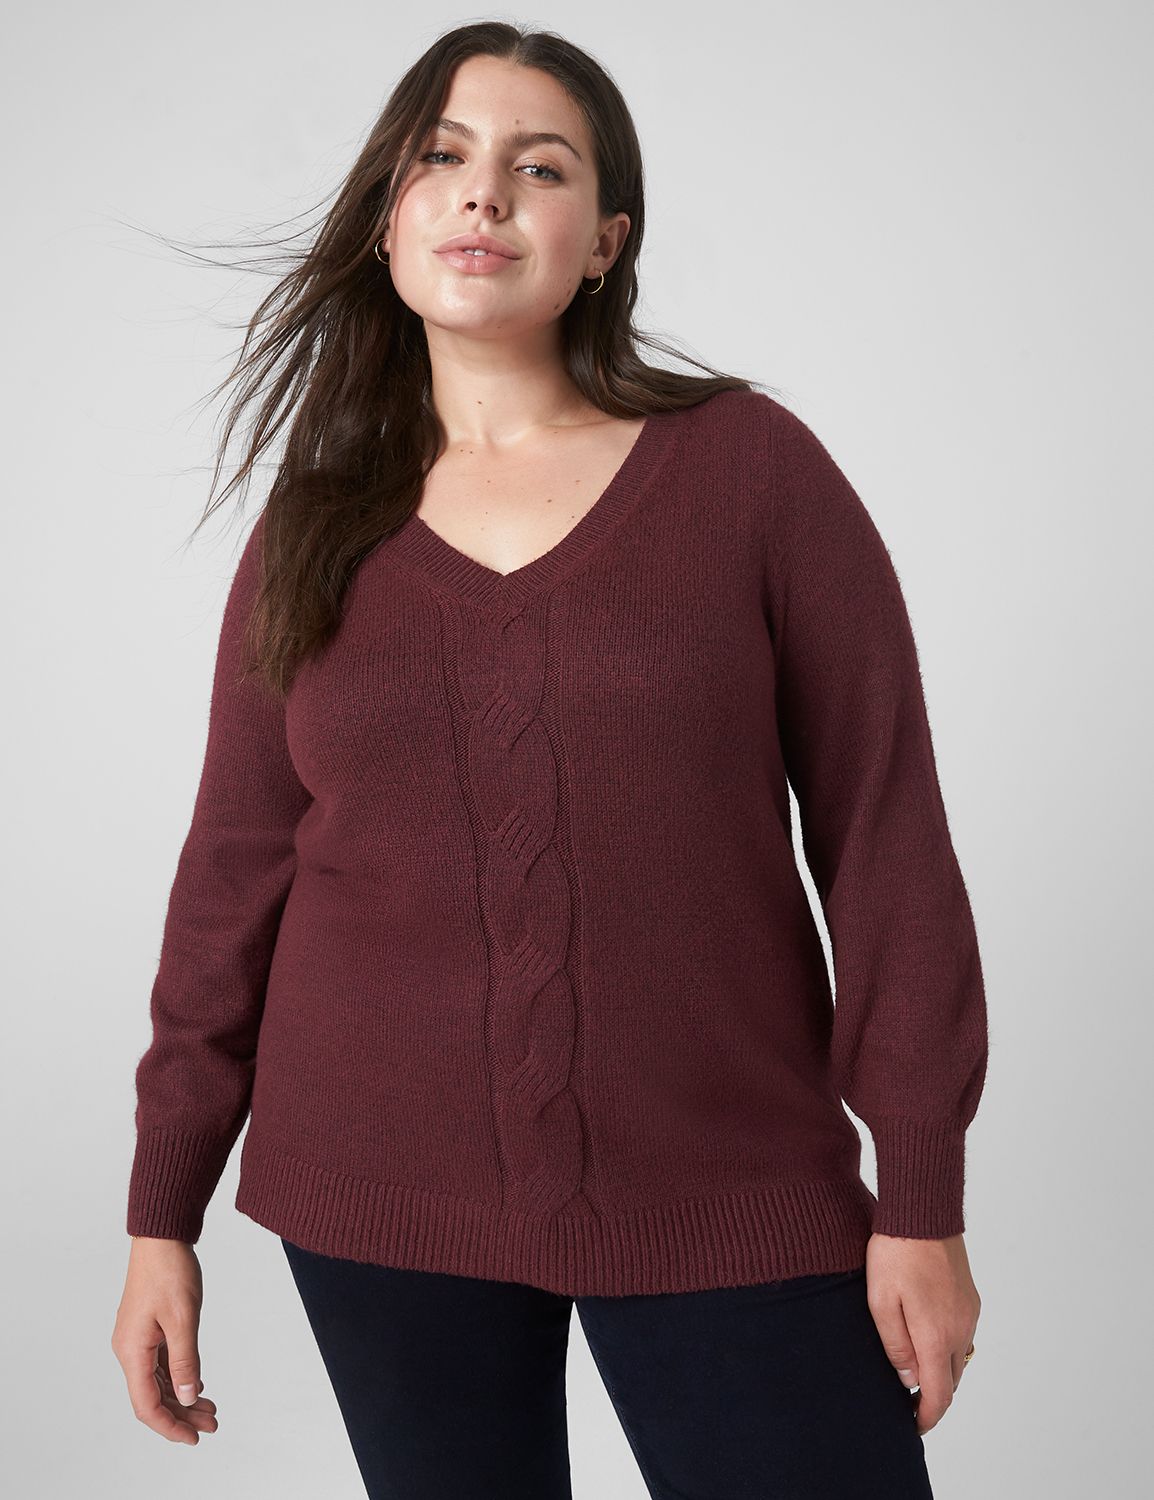 Lane Bryant Classic Tunic Pullover Cable Knit Sweater 10/12 Maroon Banner